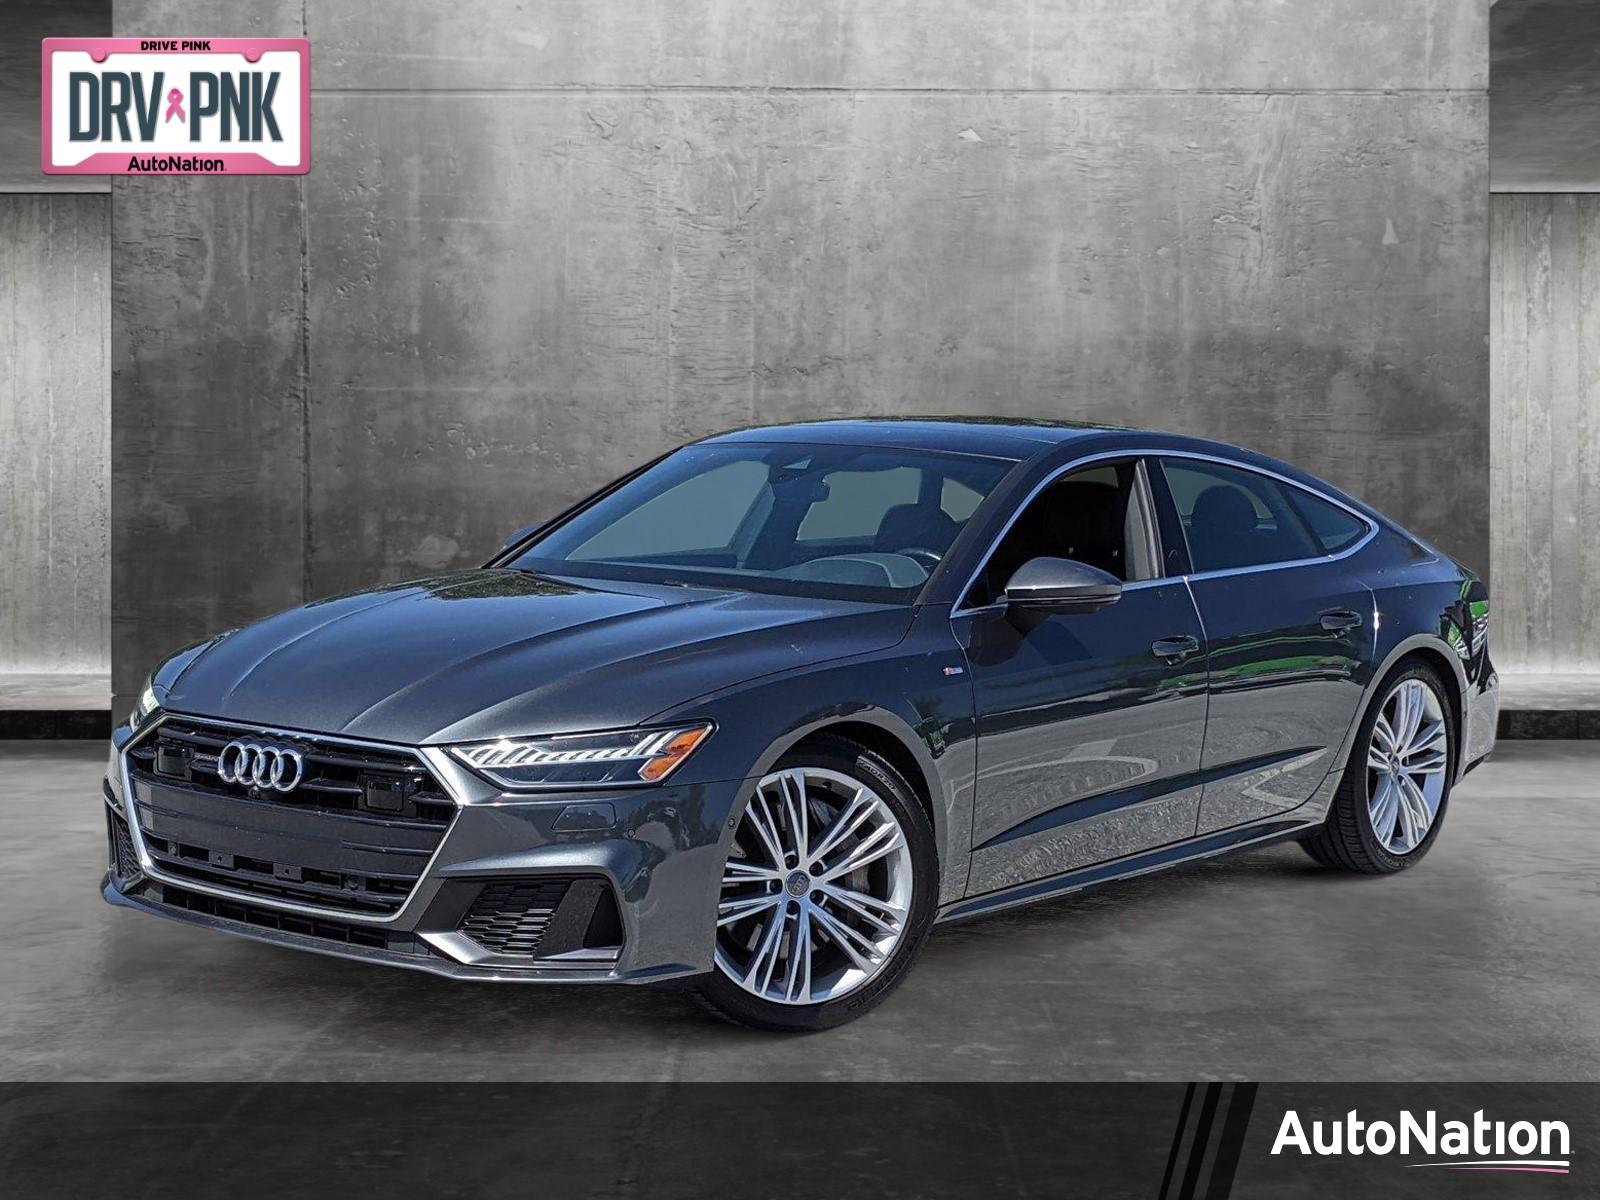 2019 Audi A7 Vehicle Photo in Hollywood, FL 33021